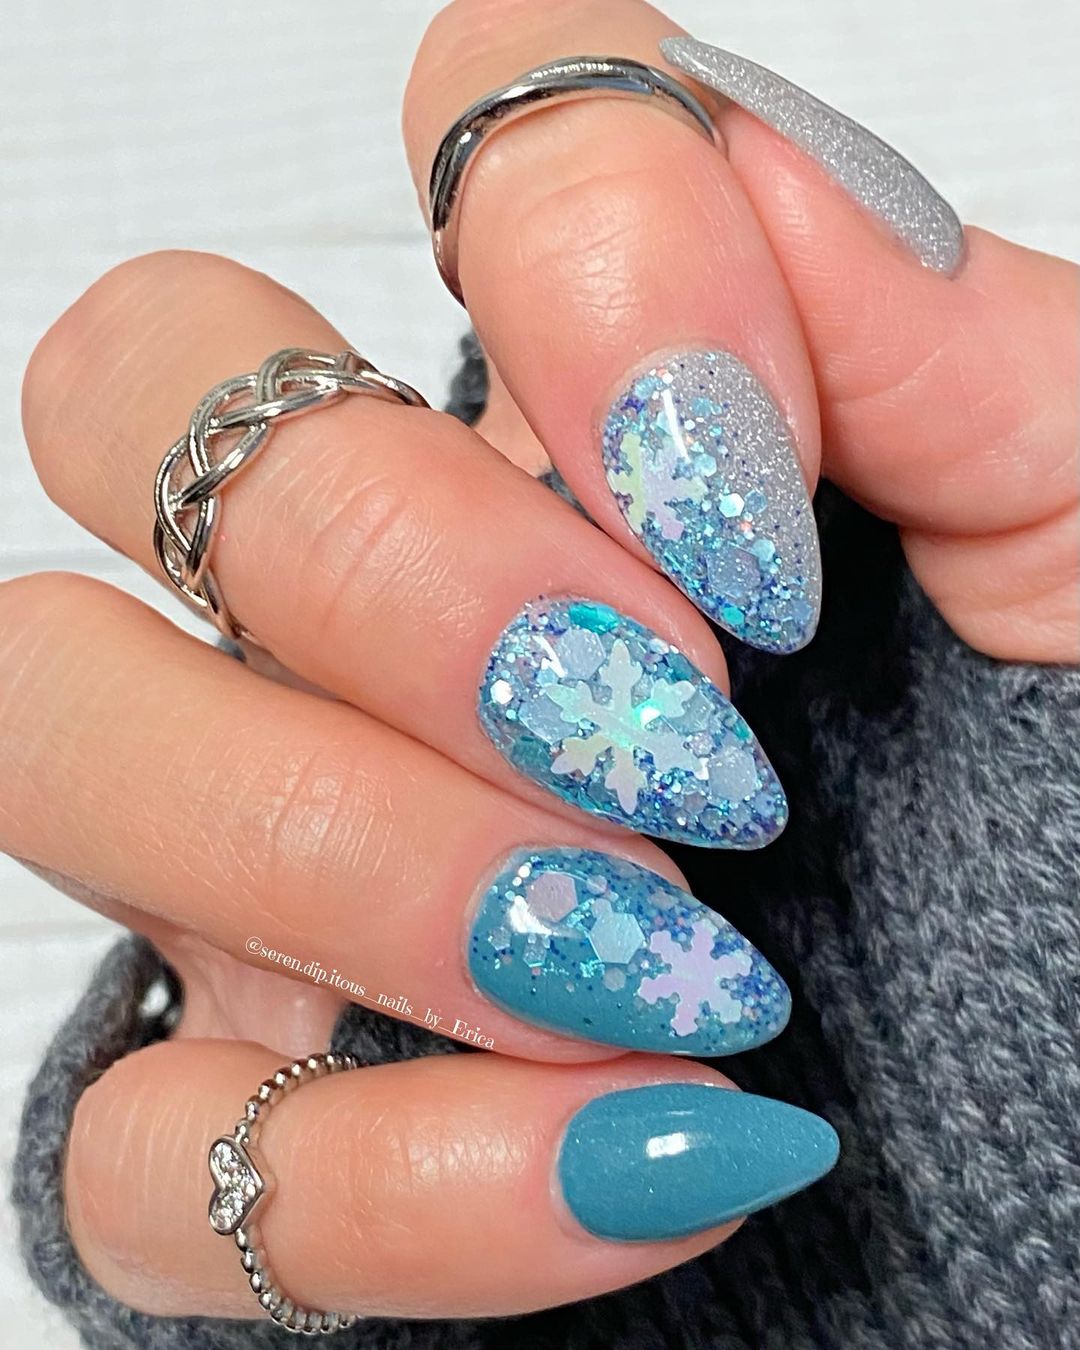 Nails with snowglobe and glitter design.